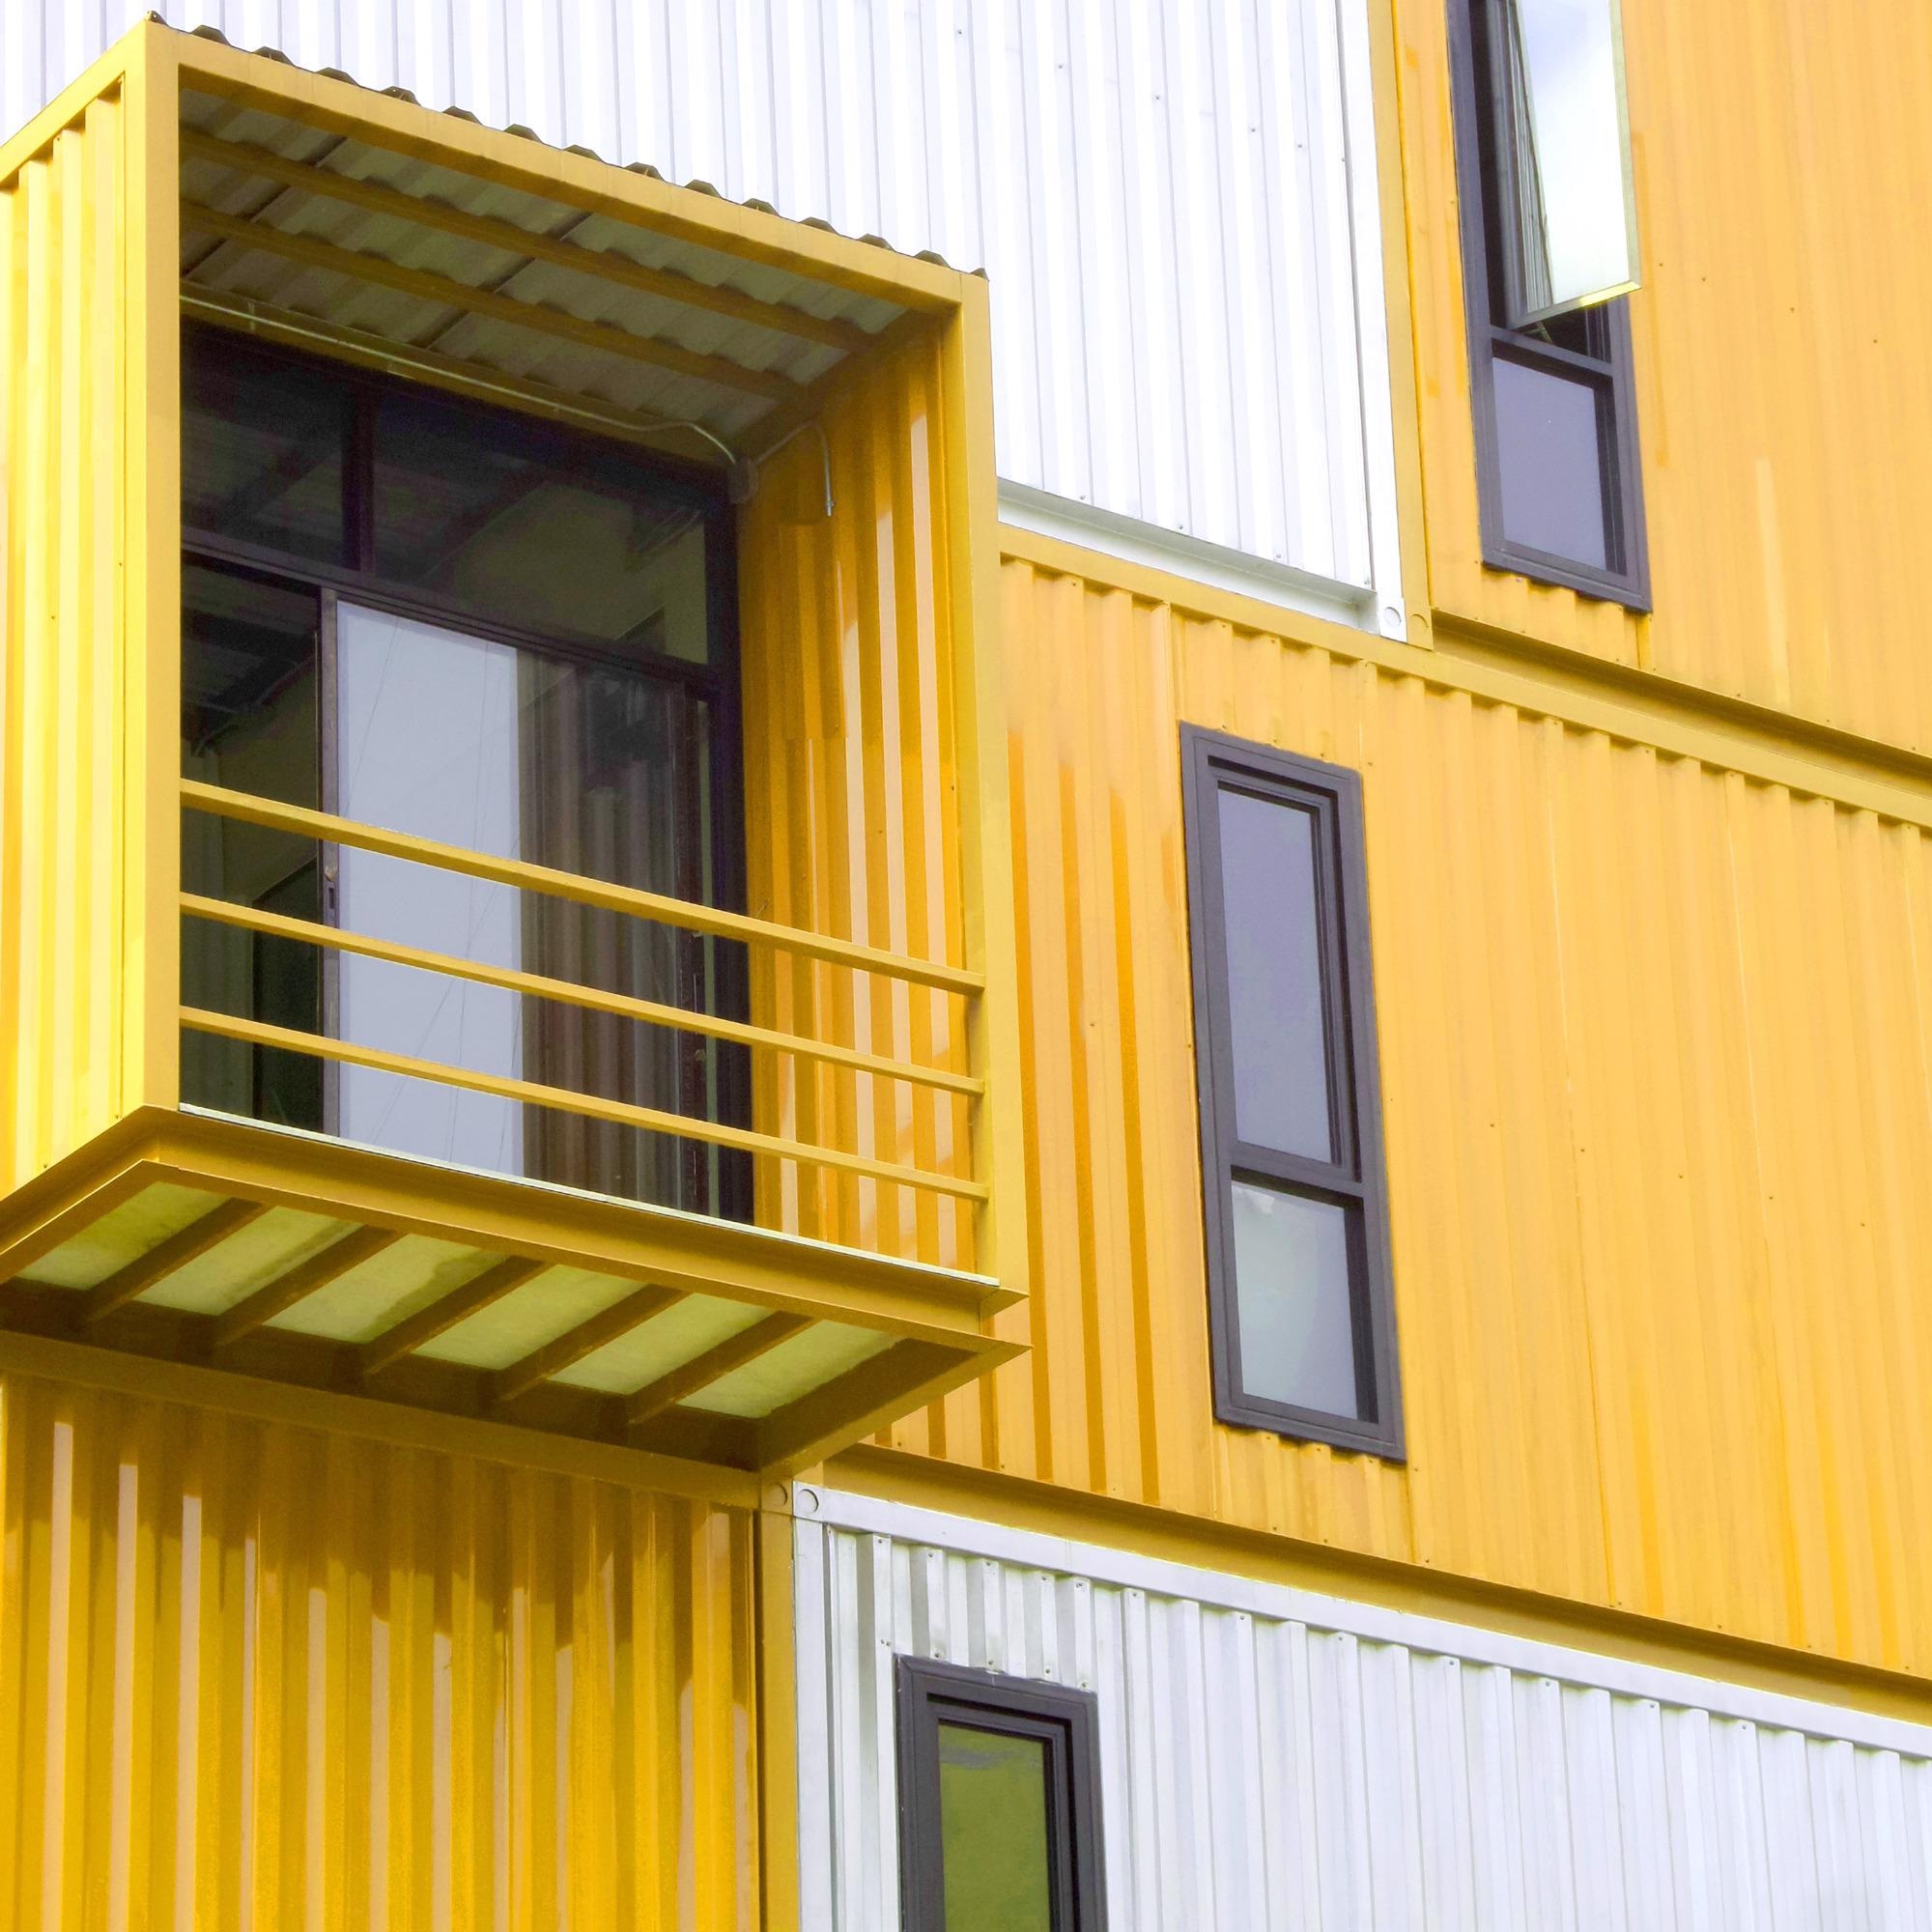 shipping containers, architecture, design, containers, building